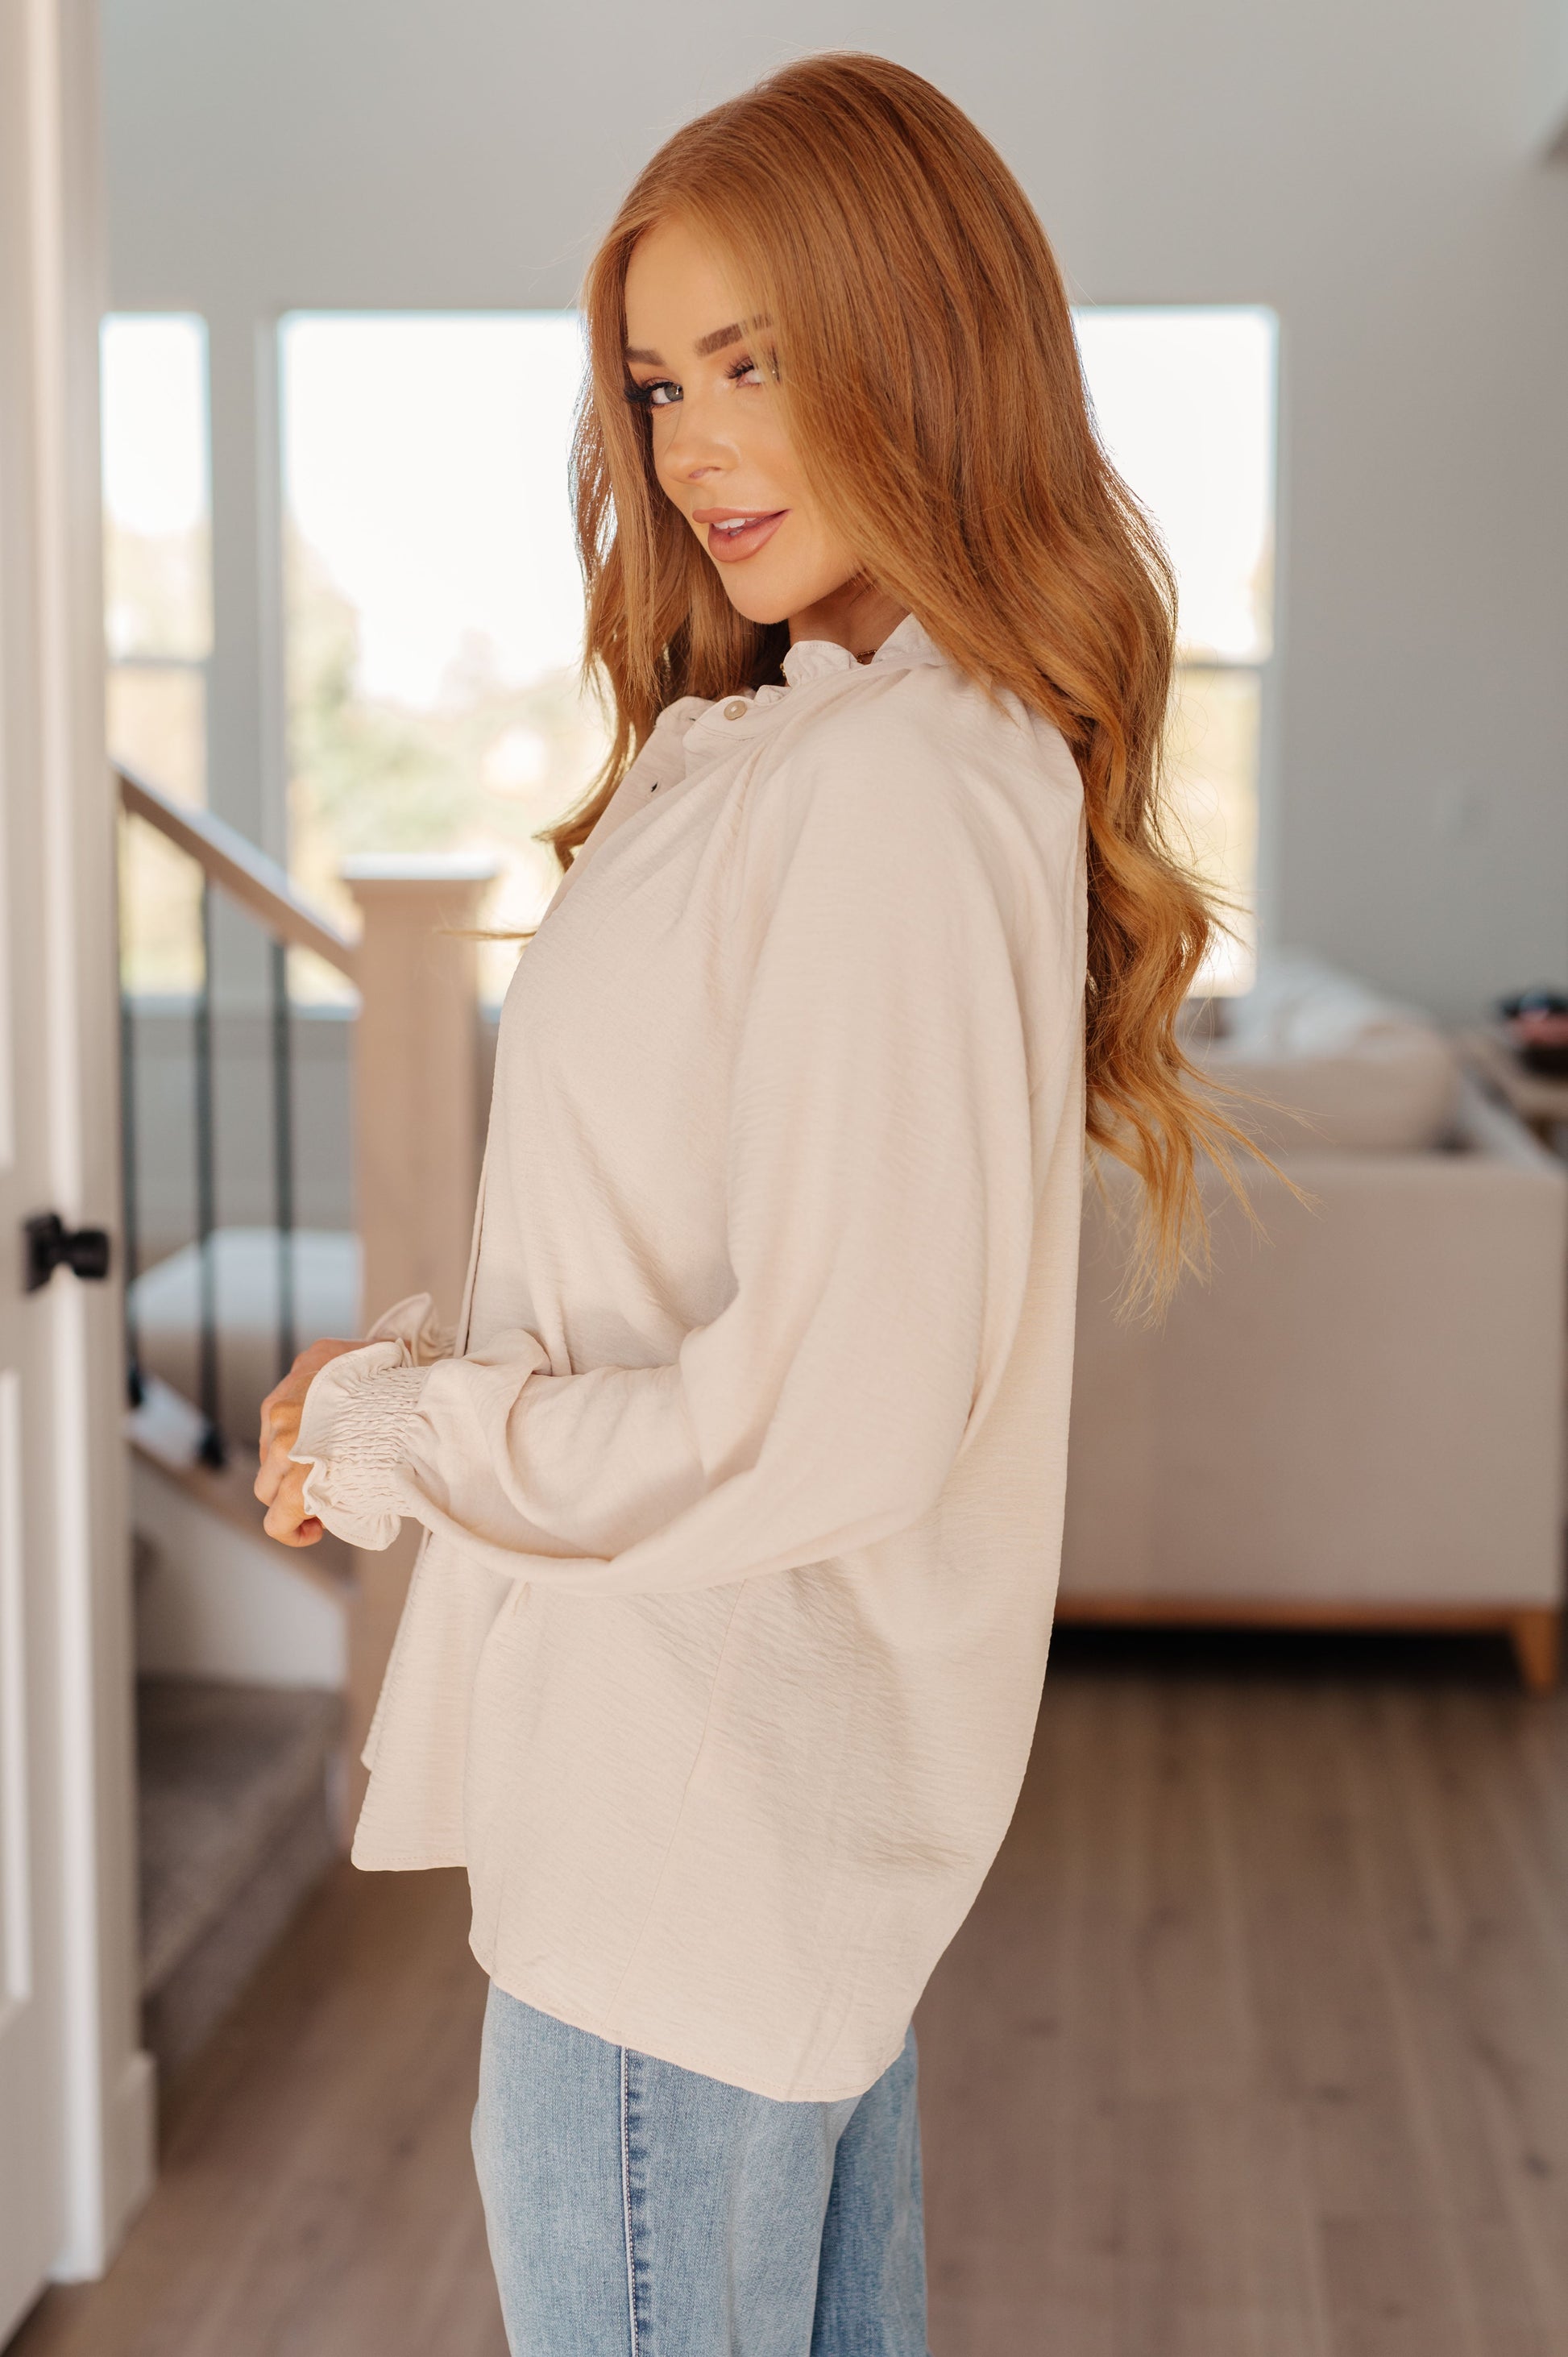 Do you want to make a fashion statement in style? The For You I Do Blouse is the perfect choice. Crafted from a delicately crinkled fabric, it features an elegant ruffled neckline with button-up detailing for an elegant look. The smocked elastic cuffs create an air of sophistication that's sure to make heads turn. Enjoy effortless style with this must-have blouse! S - 3X